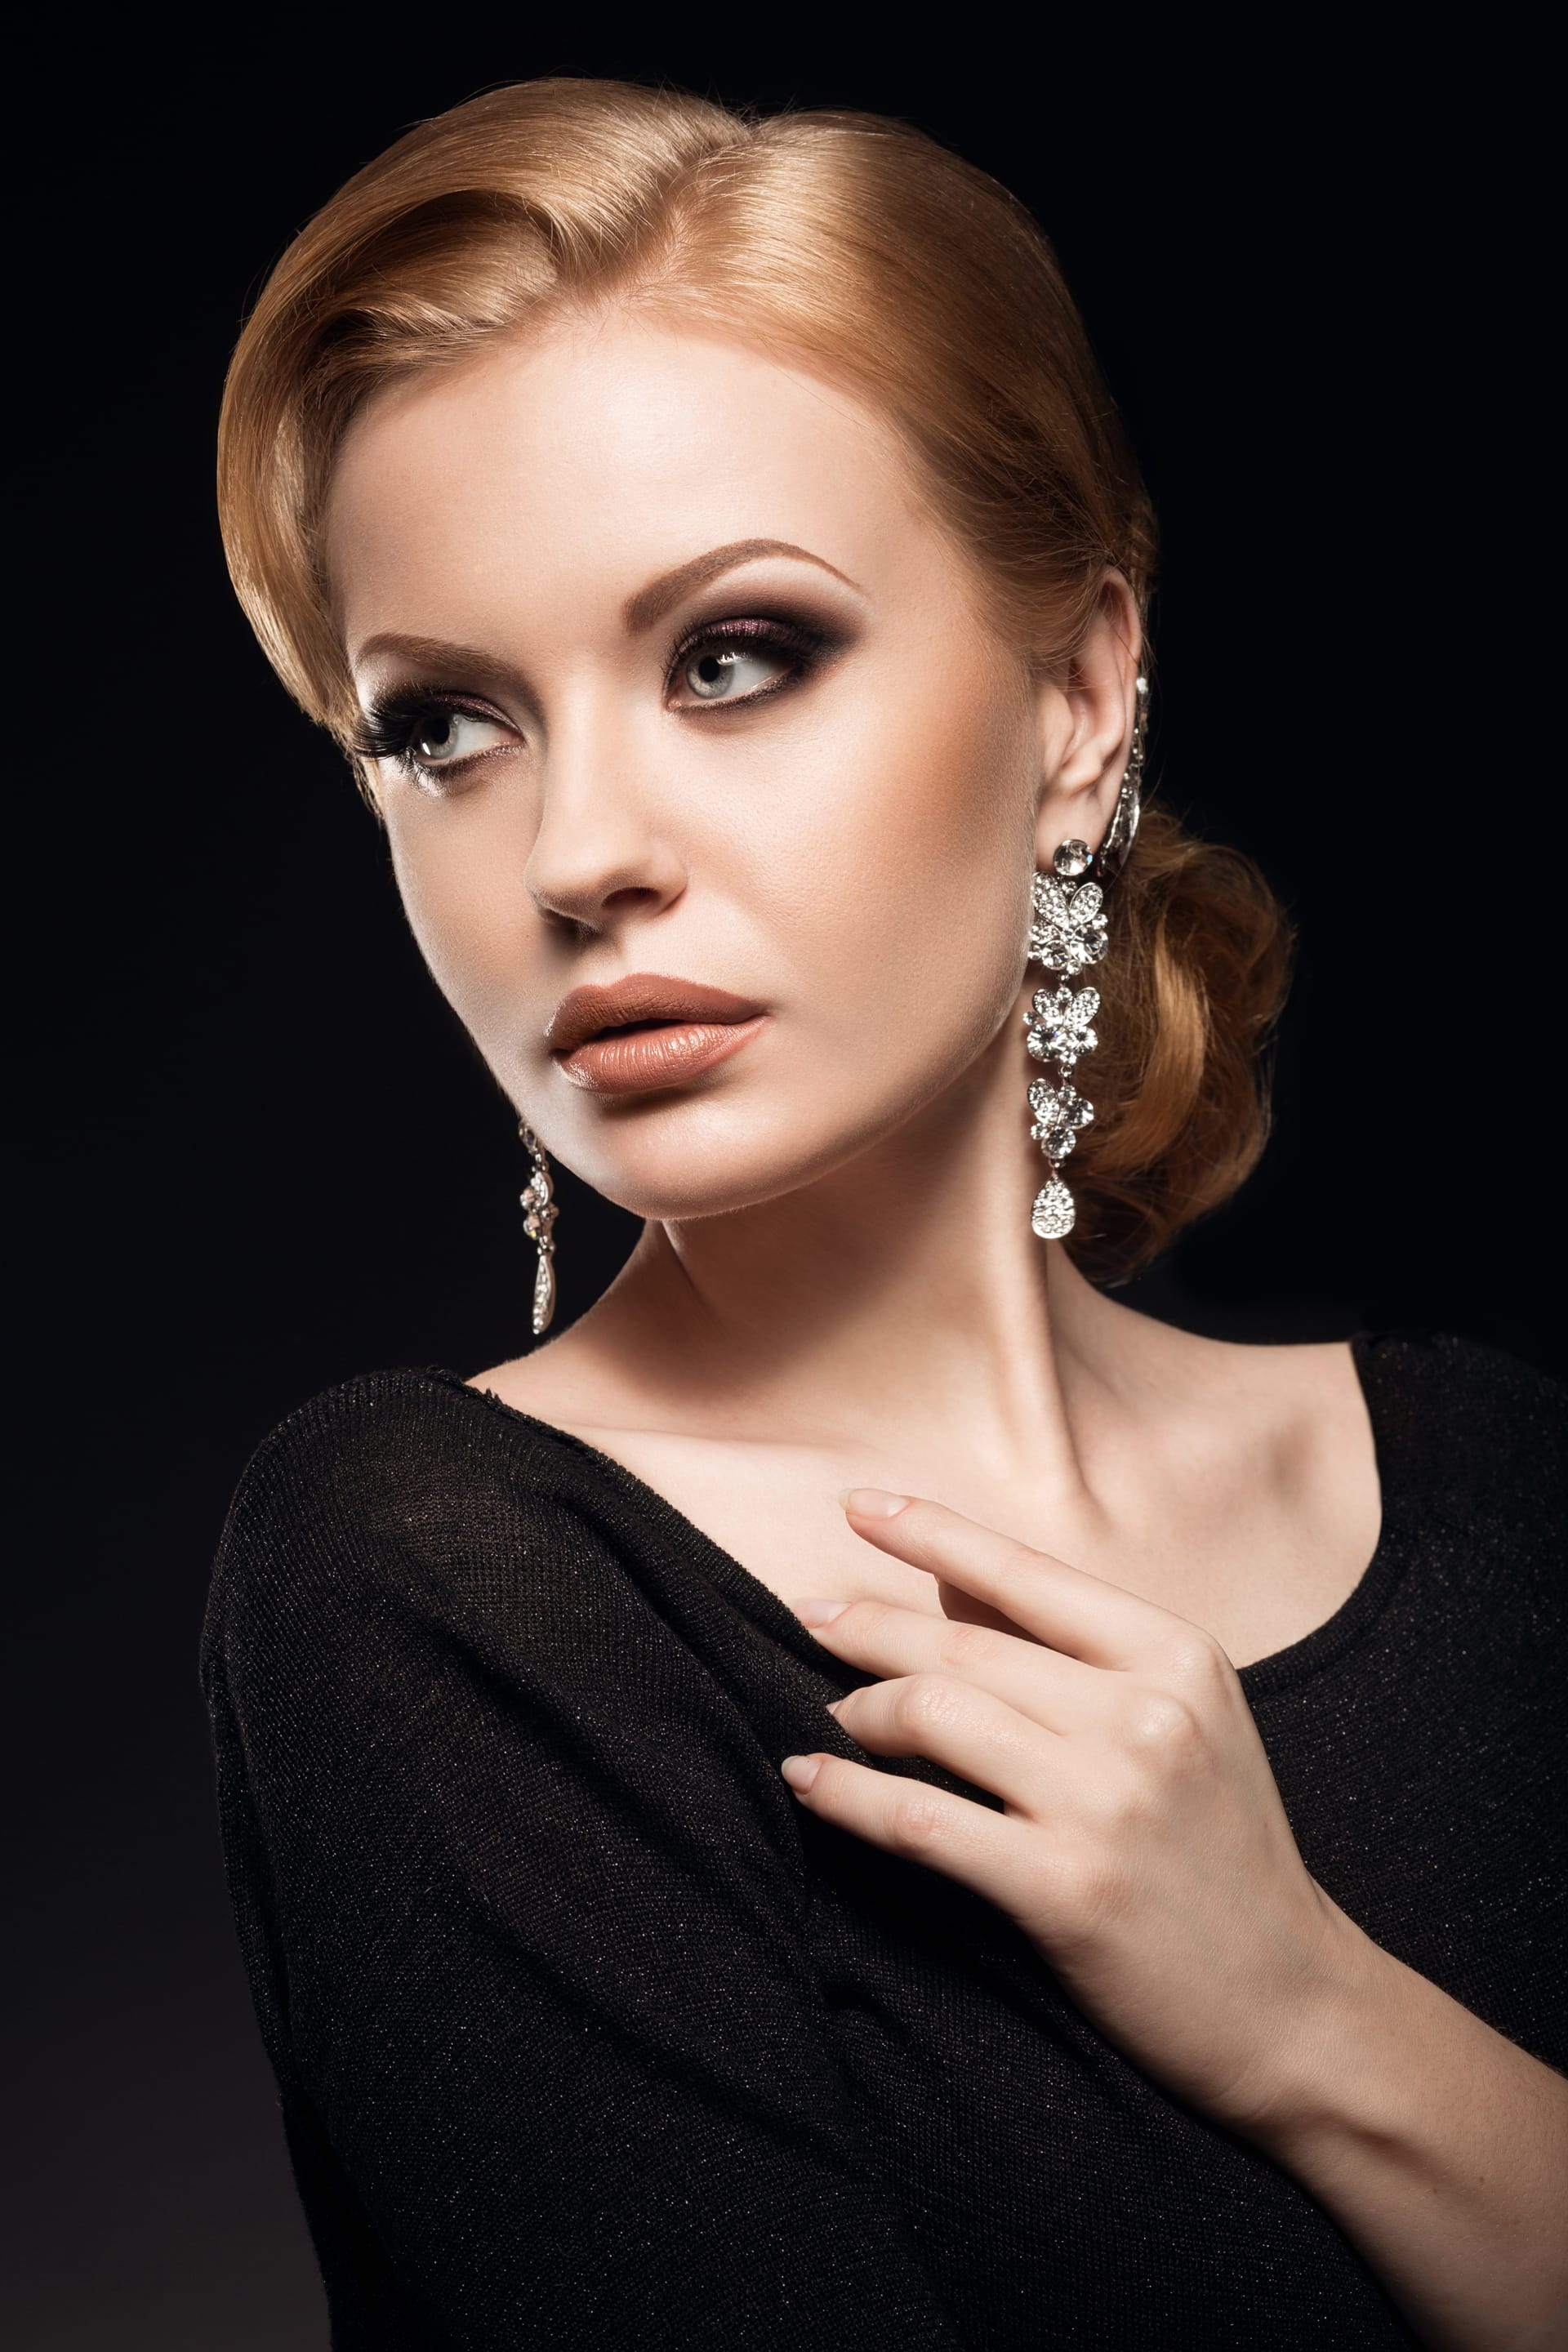 Portrait young woman with elegant hairstyle aesthetic profile pics